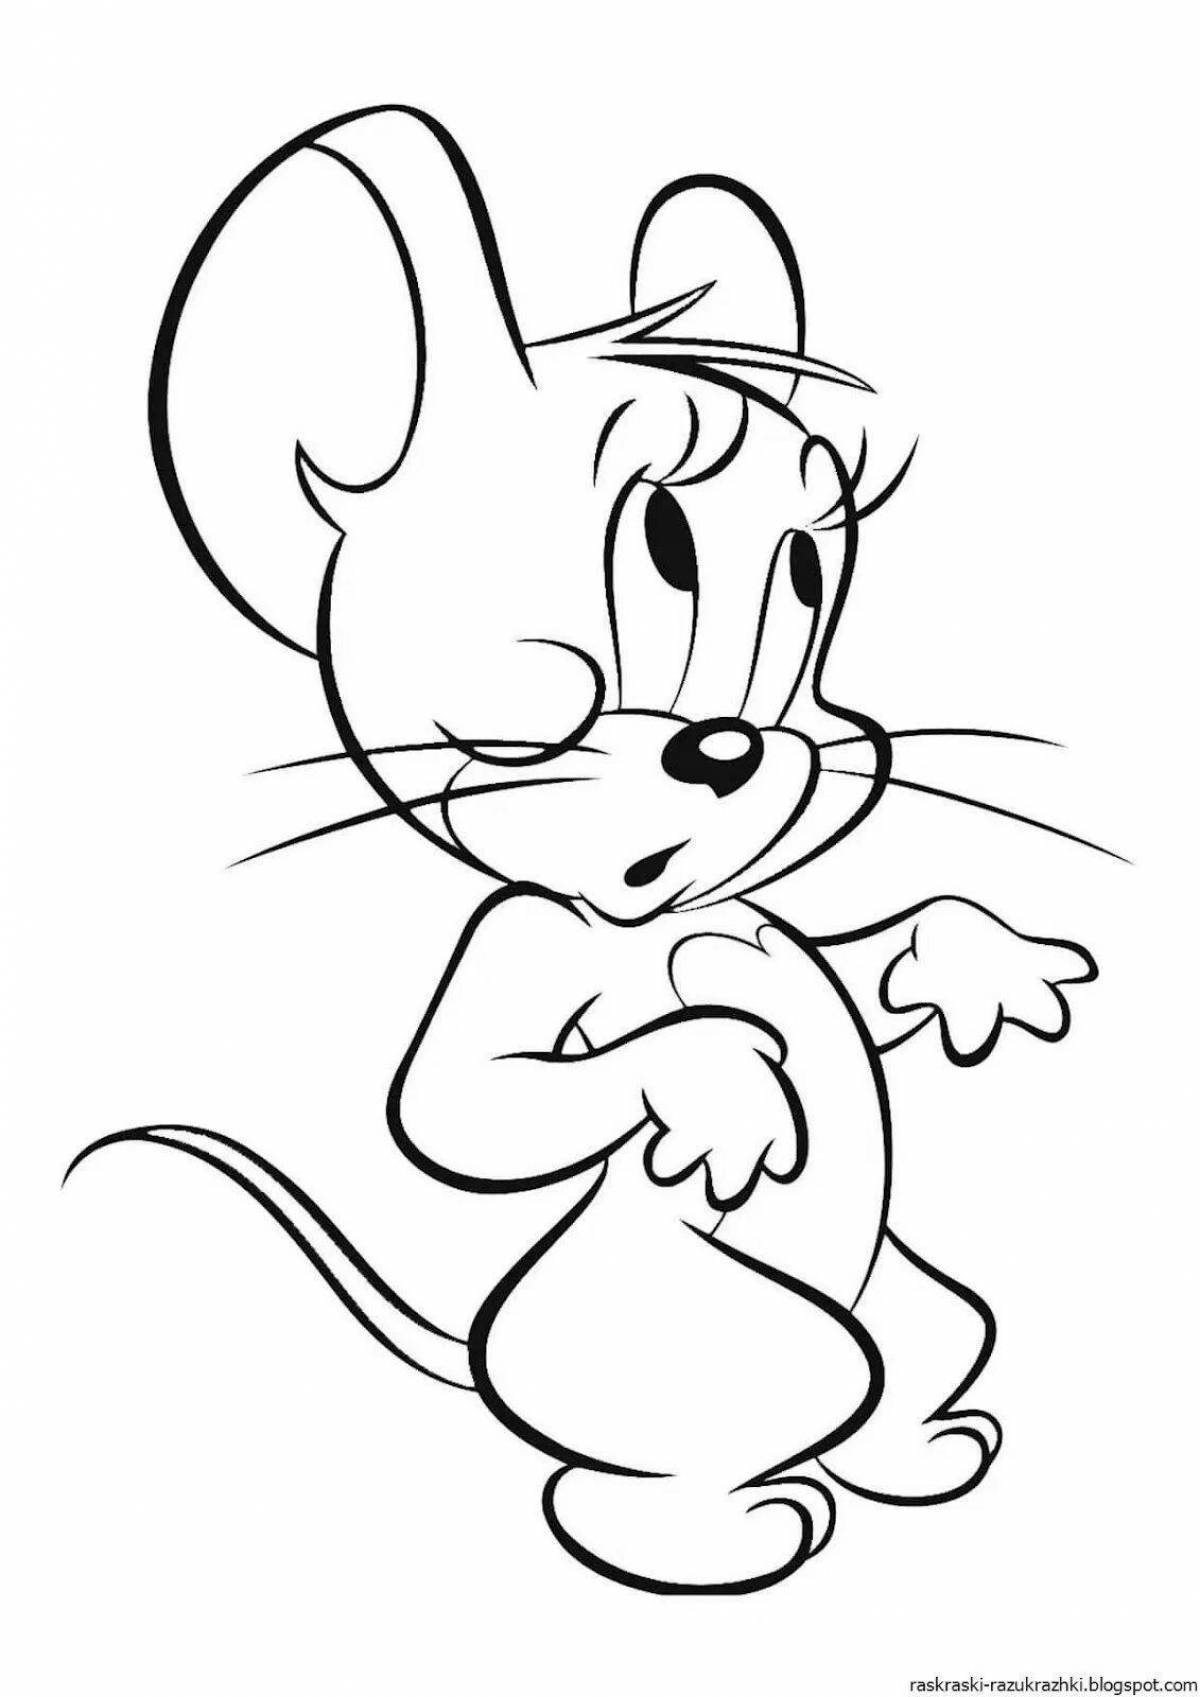 Tim the adorable mouse coloring book